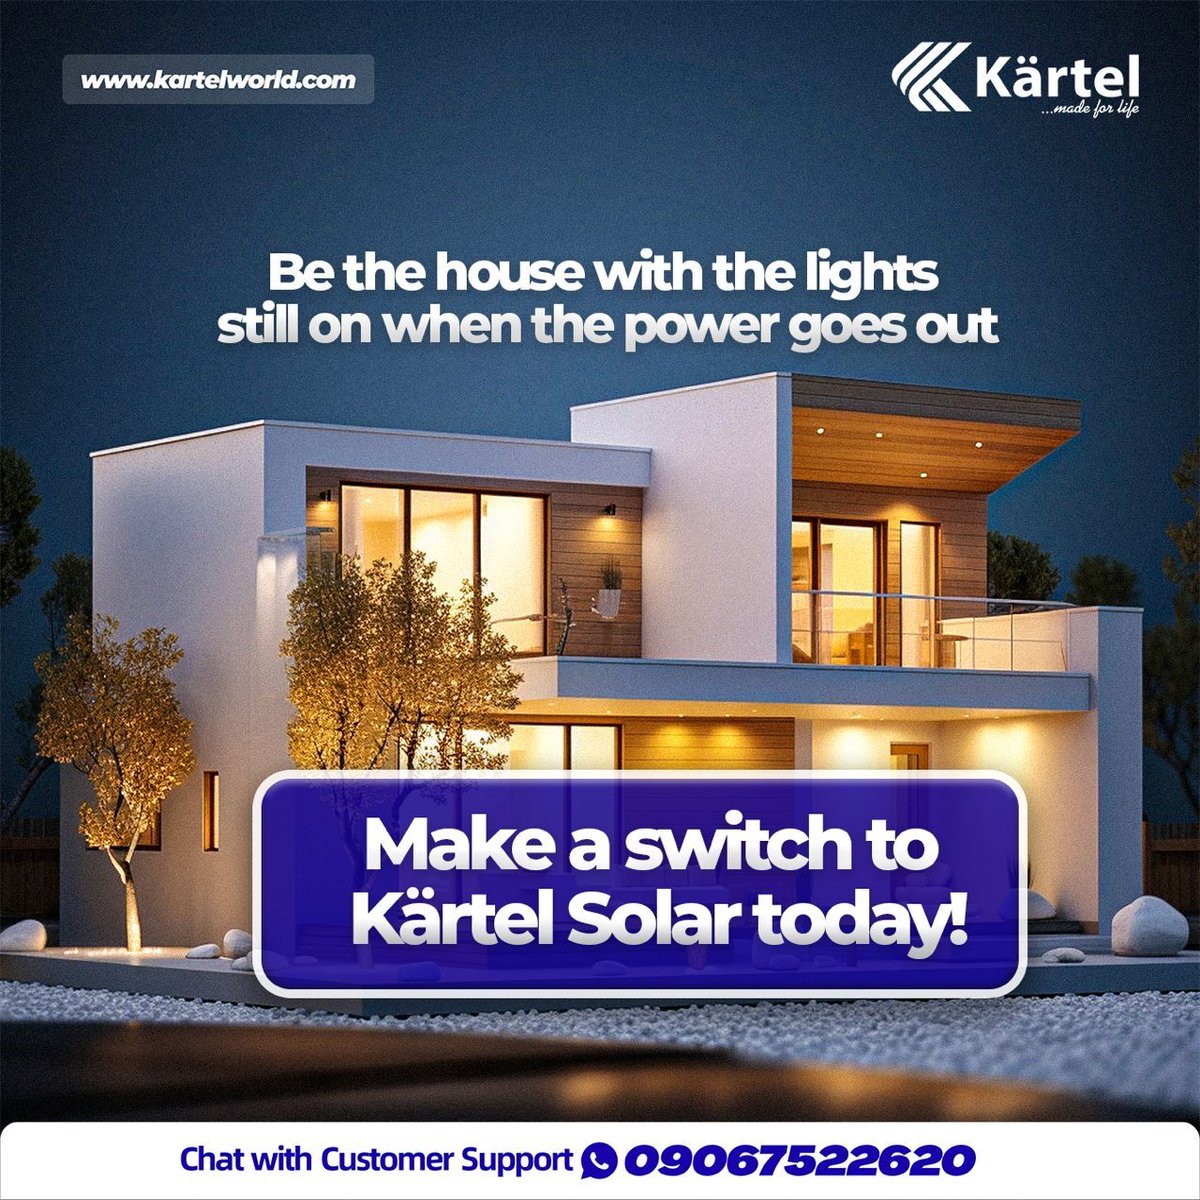 Don’t be left in the dark when the power goes out! 💡 Be the beacon of light in your neighborhood with Kärtel Solar! 

Make the smart switch to Kärtel Solar and keep your lights shining bright even during blackouts.

#KartelSolar #SustainableEnergy #BrightIdeas